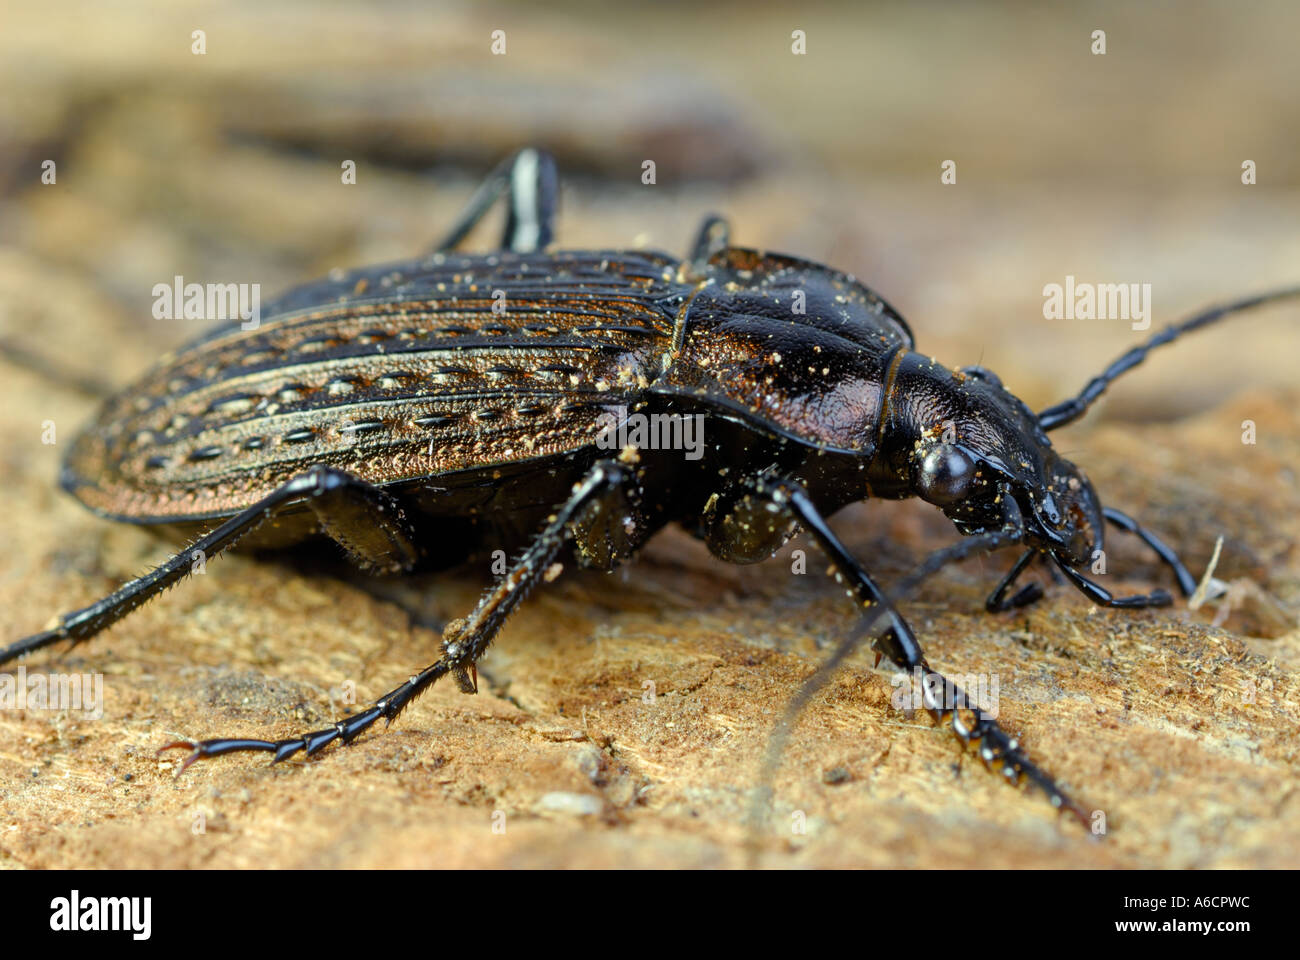 close up side view of Common Black Ground Beetle Pterostichus melanarius on wood Stock Photo